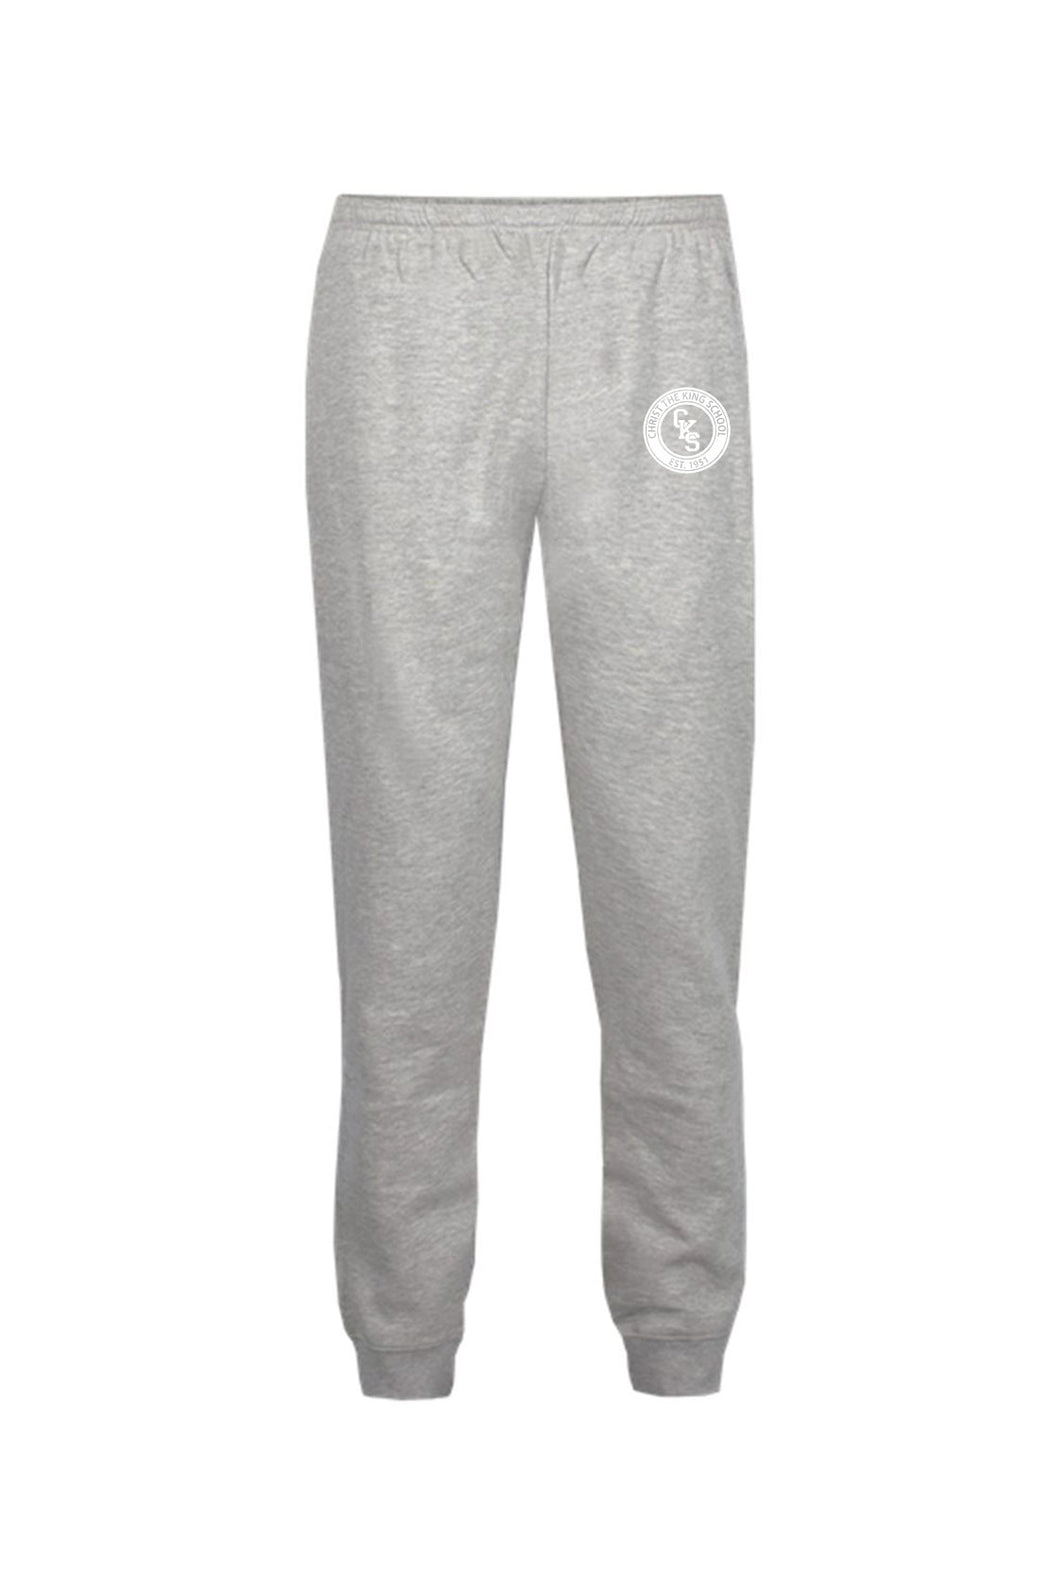 Badger Youth Fleece Jogger-XS only